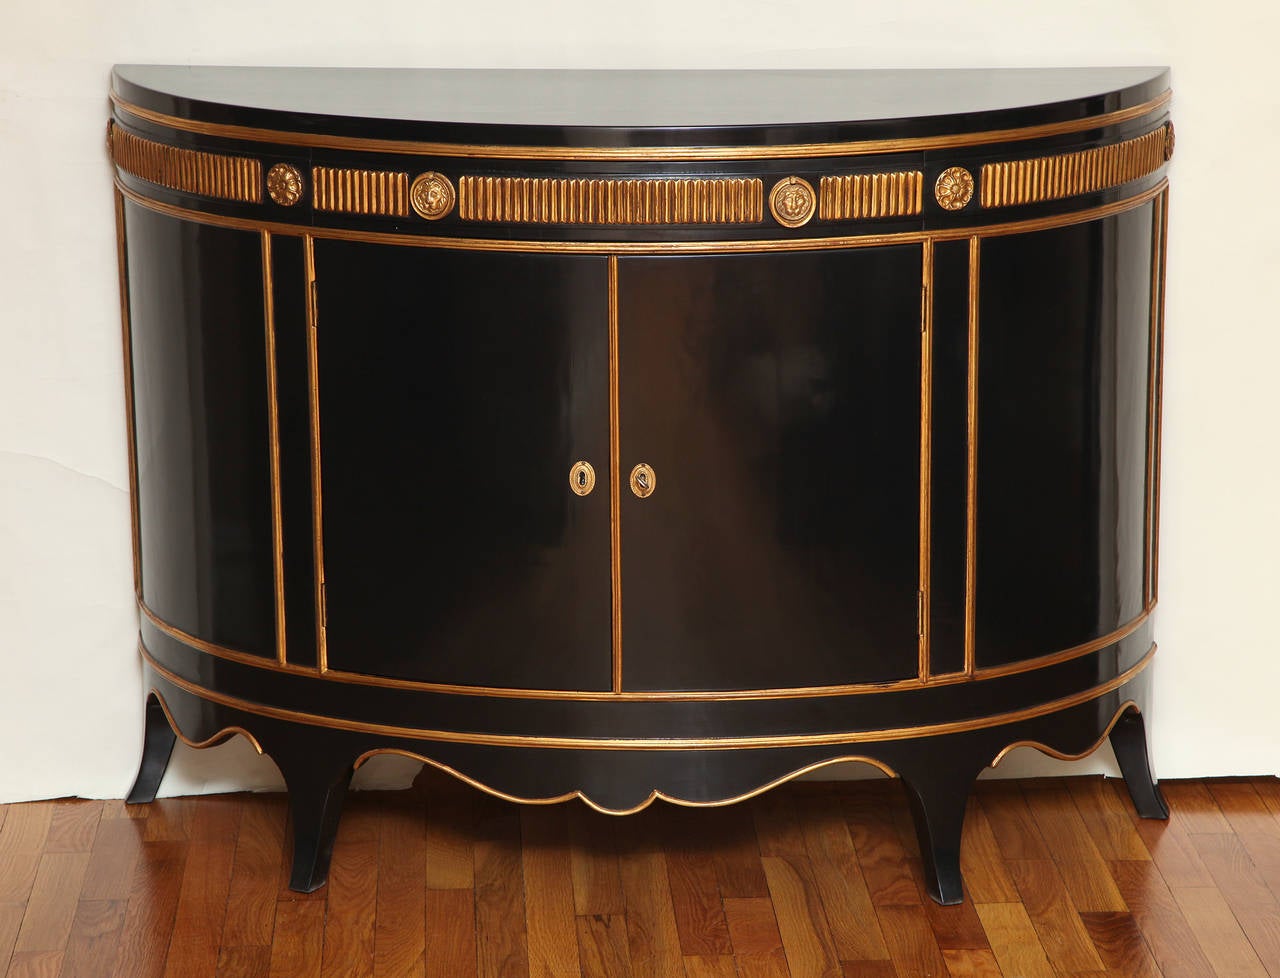 English Pair of Hollywood Regency Demi-Lune Cabinets